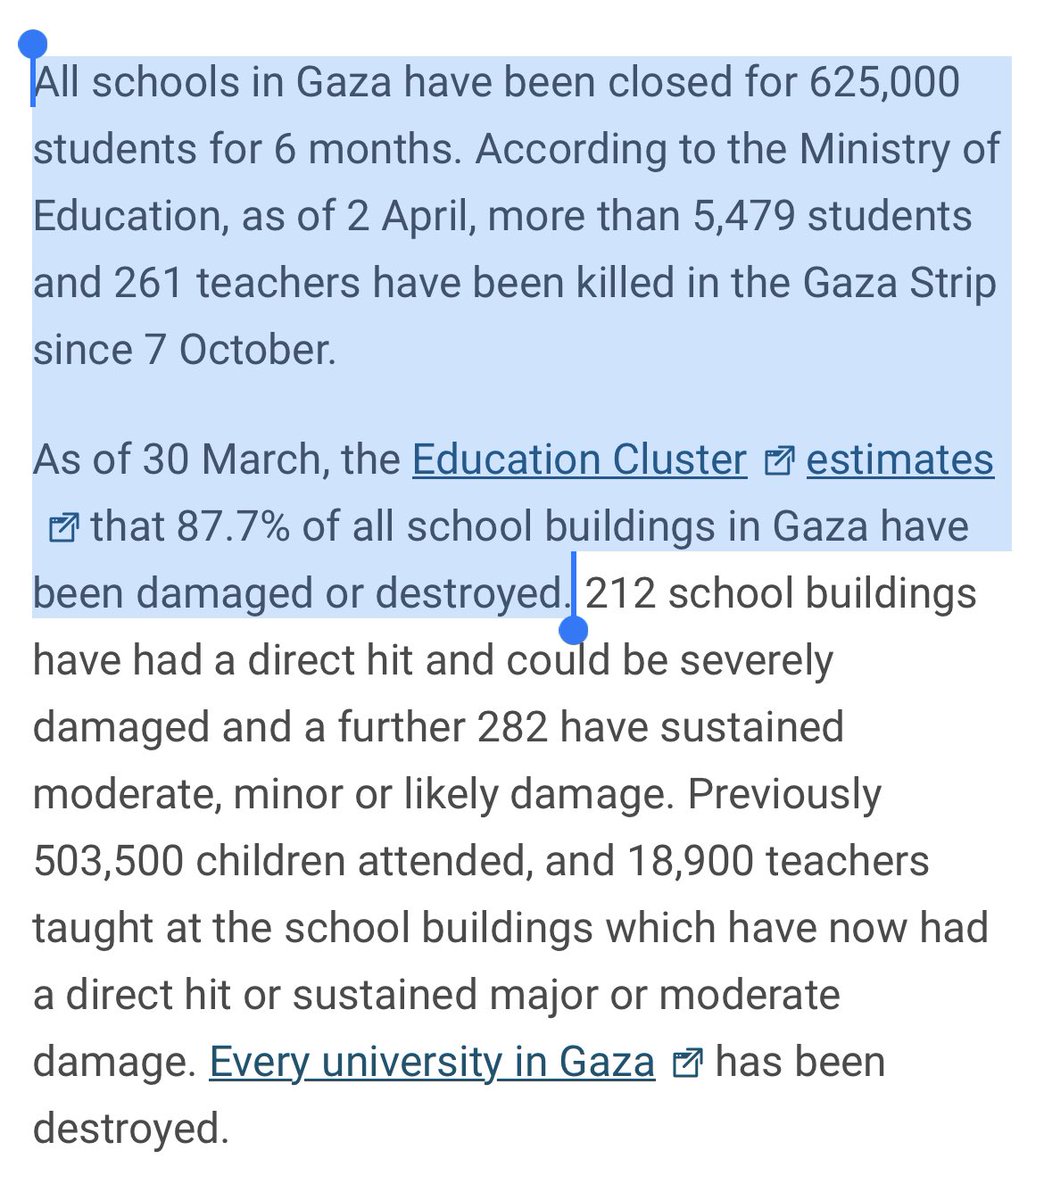 “All schools in Gaza have been closed for 625,000 students for 6 months… 261 teachers have been killed in the Gaza Strip since 7 October.” #TeacherAppreciationDay